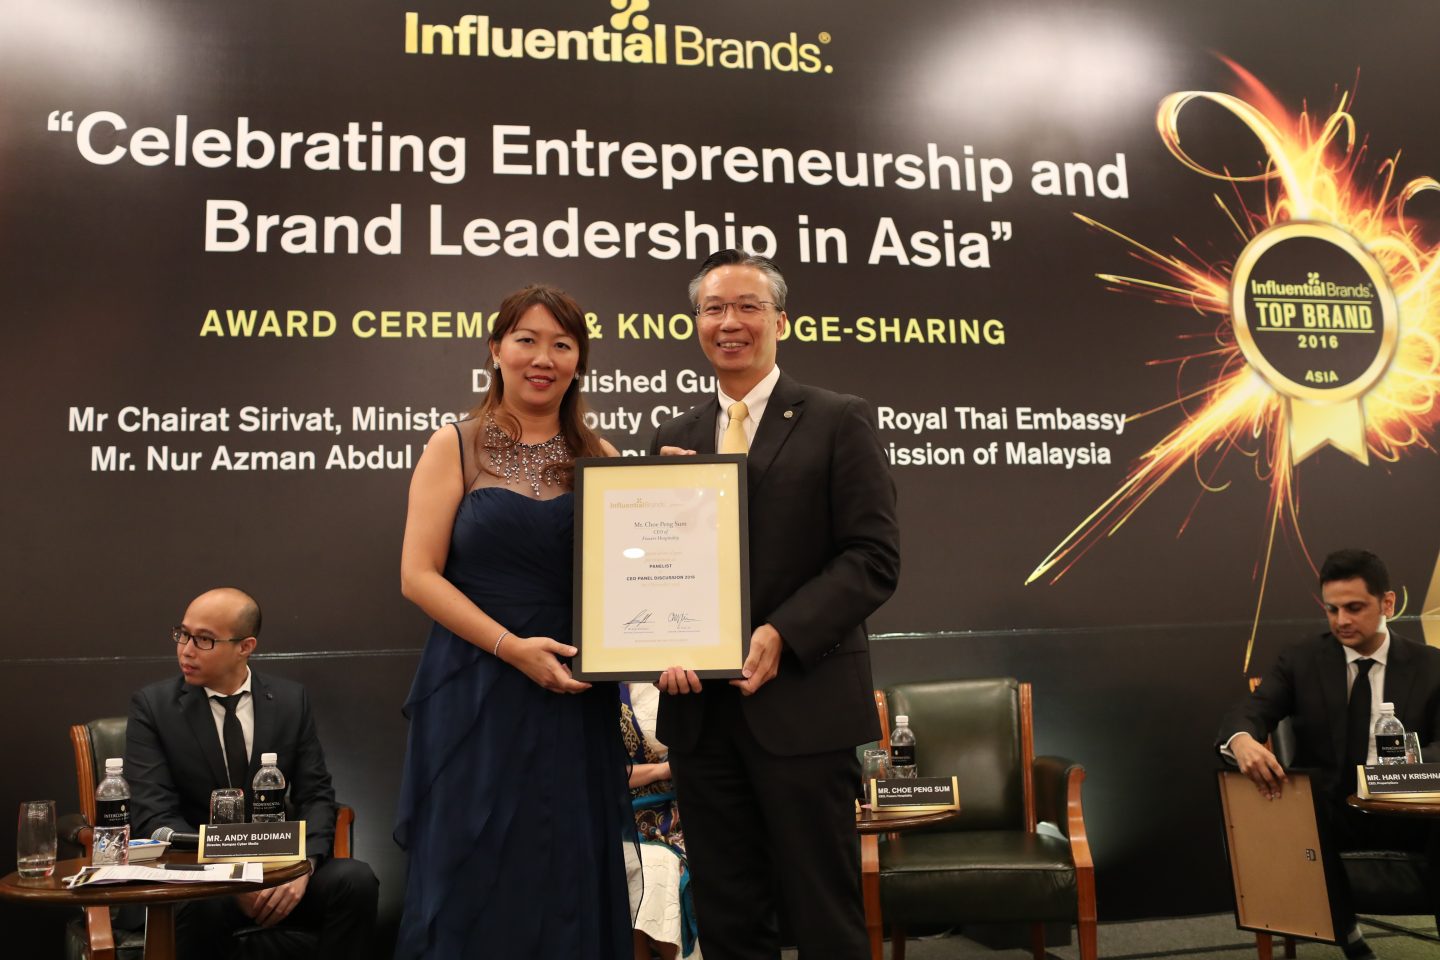 he greatest joy as a leader is to be able to influence the environment,” Choe shares. At the Influential Brands Award where he shared on a panel, 2016.